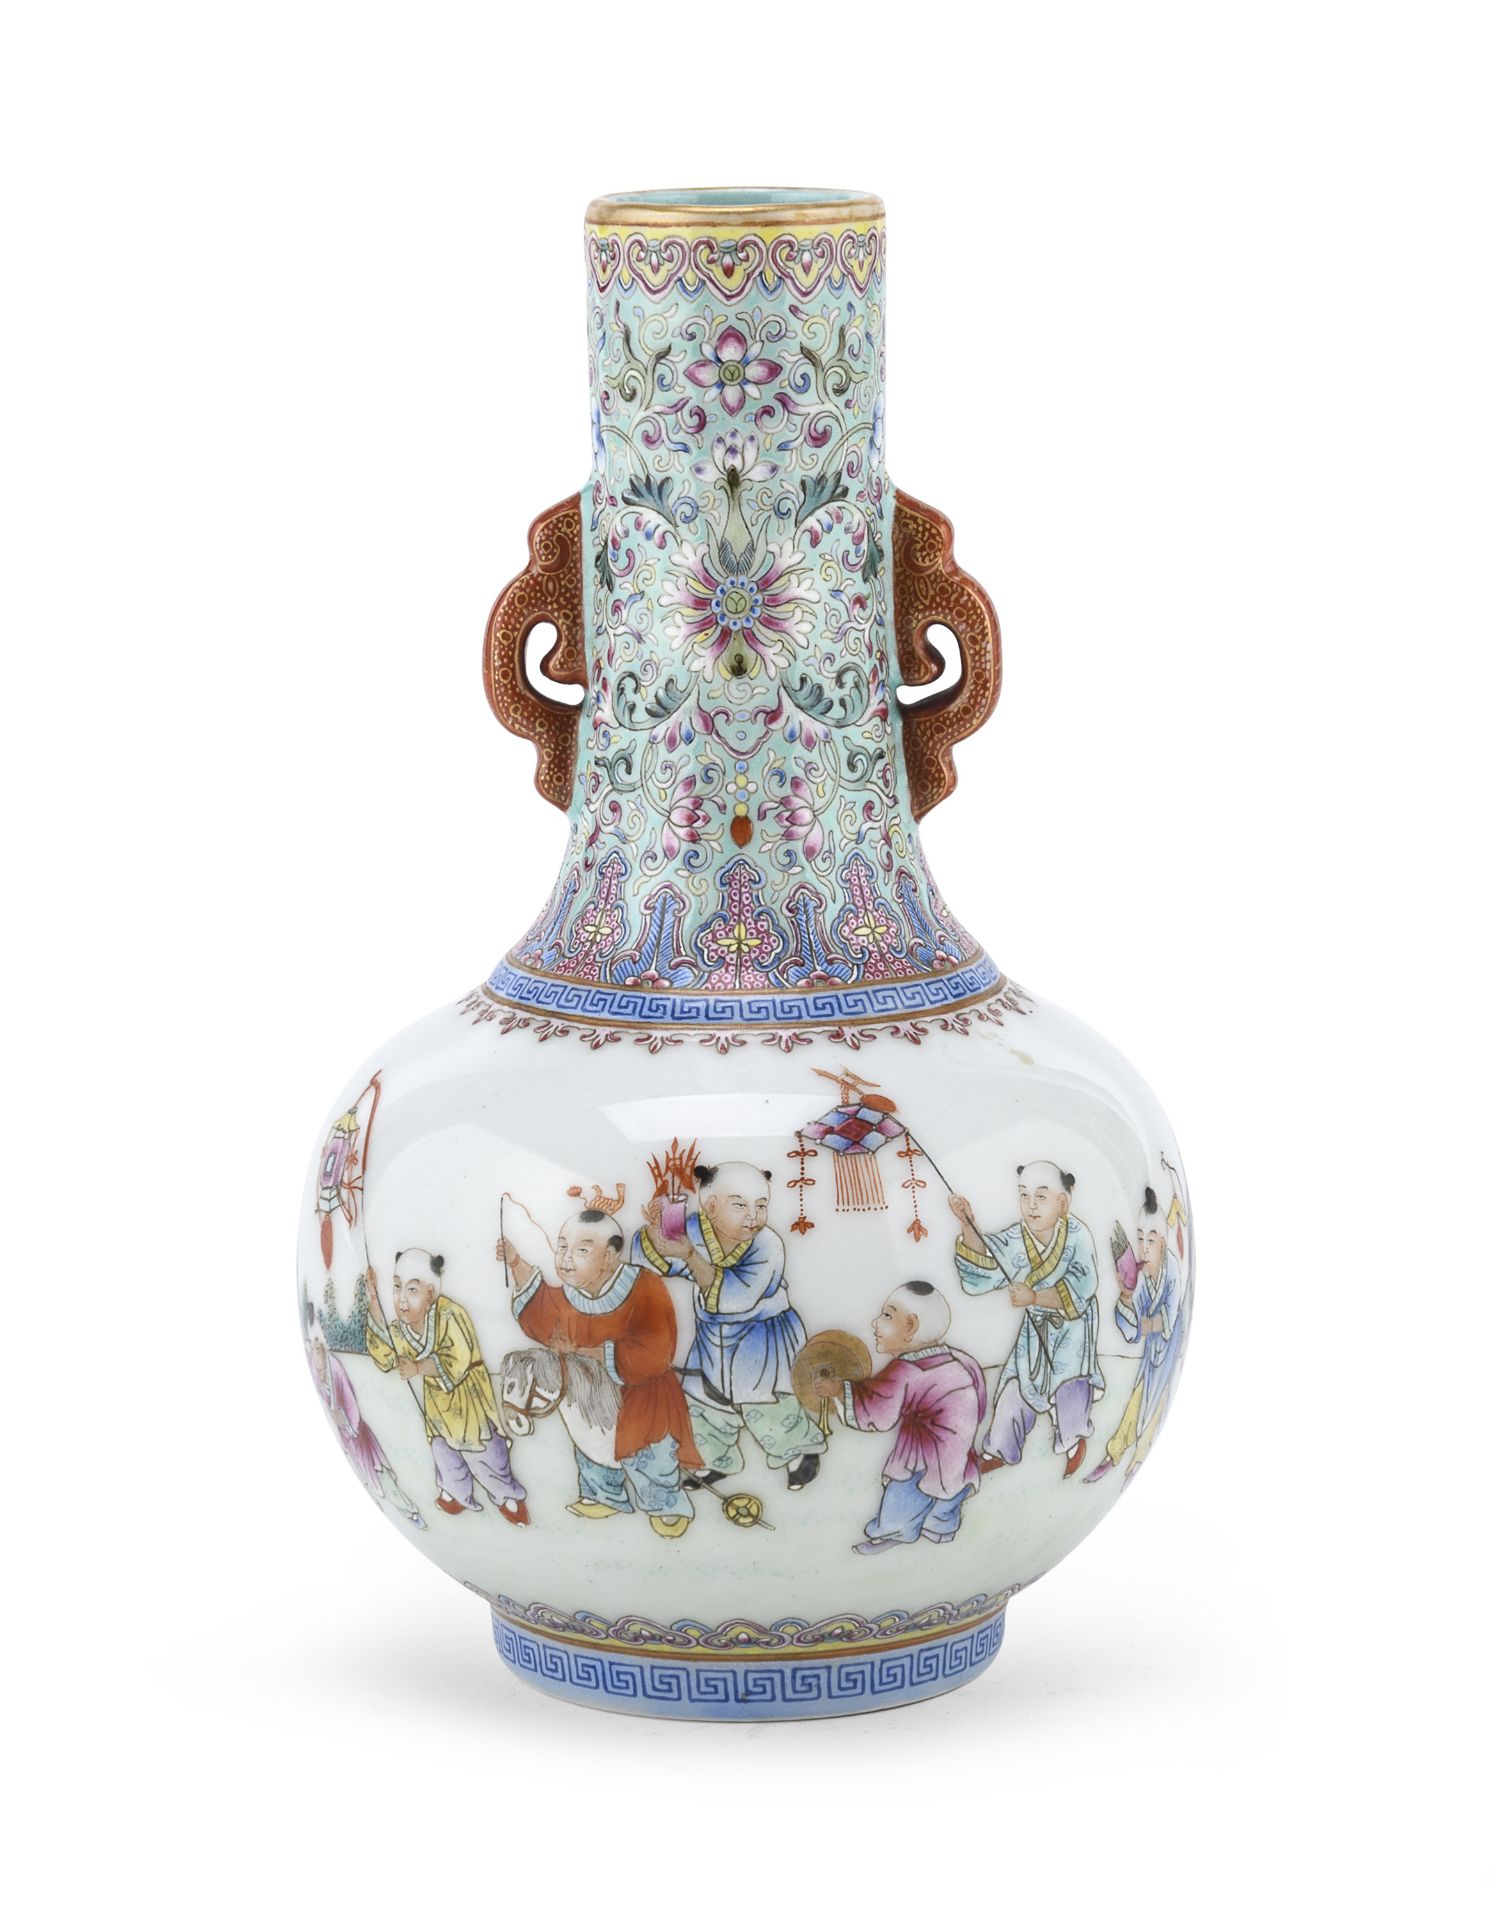 RARE PORCELAIN VASE WITH POLYCHROME ENAMELS AND GOLD CHINA 19TH CENTURY